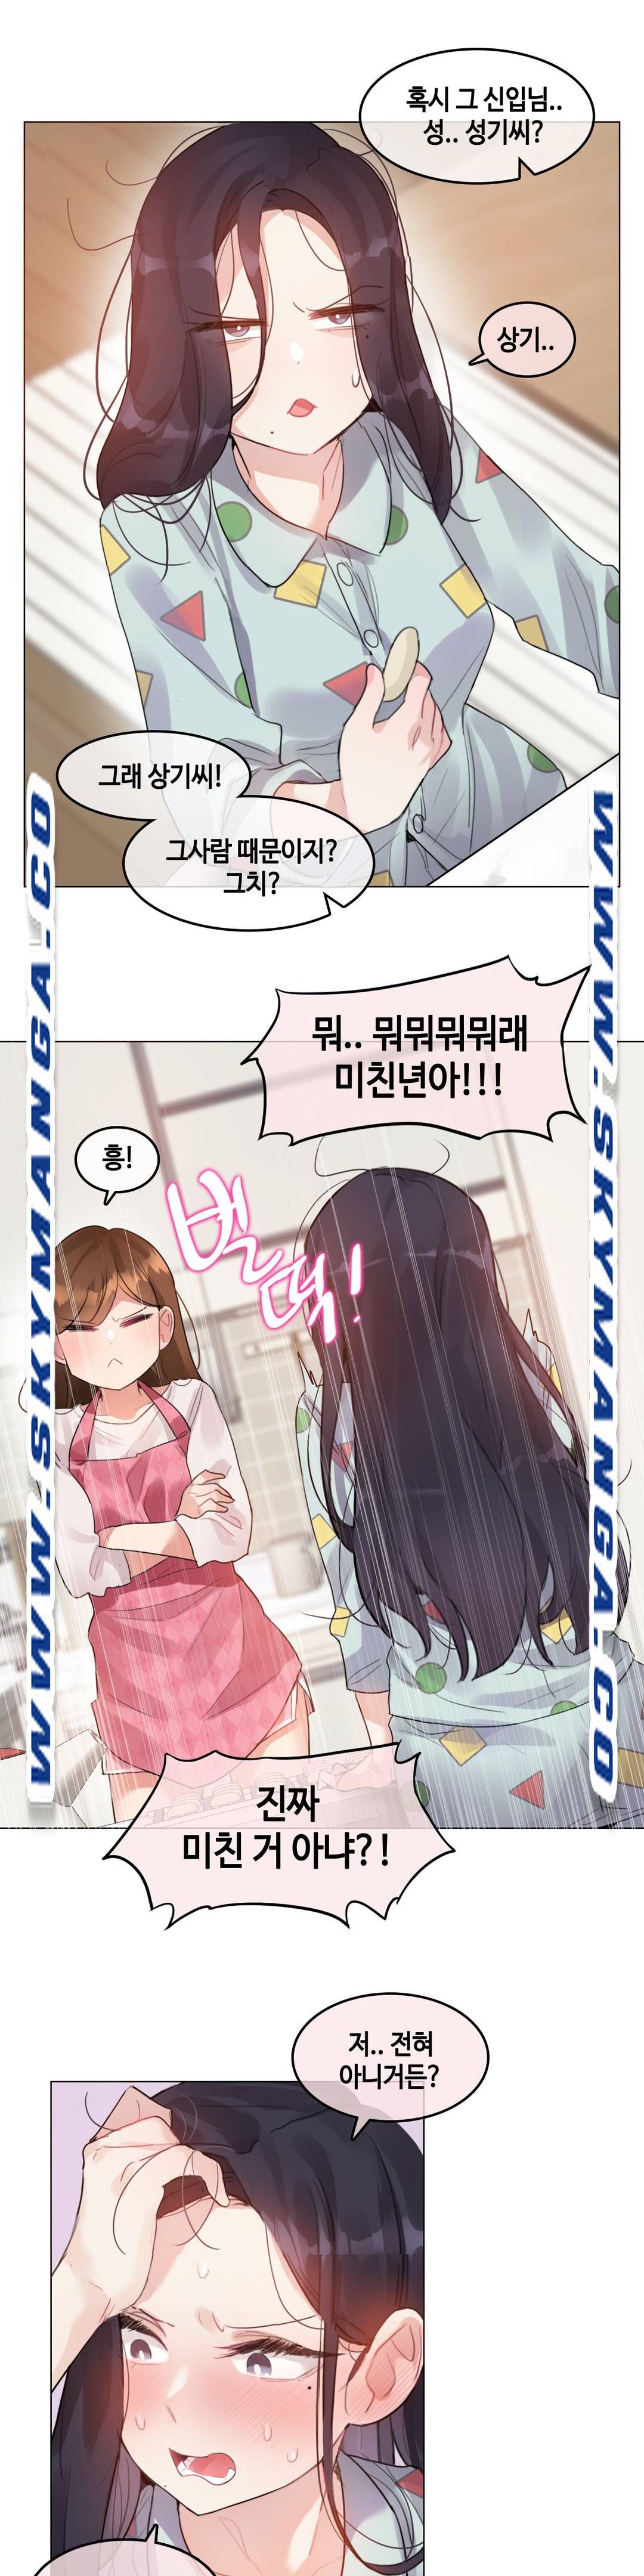 A Perverts Daily Life Raw - Chapter 98 Page 4